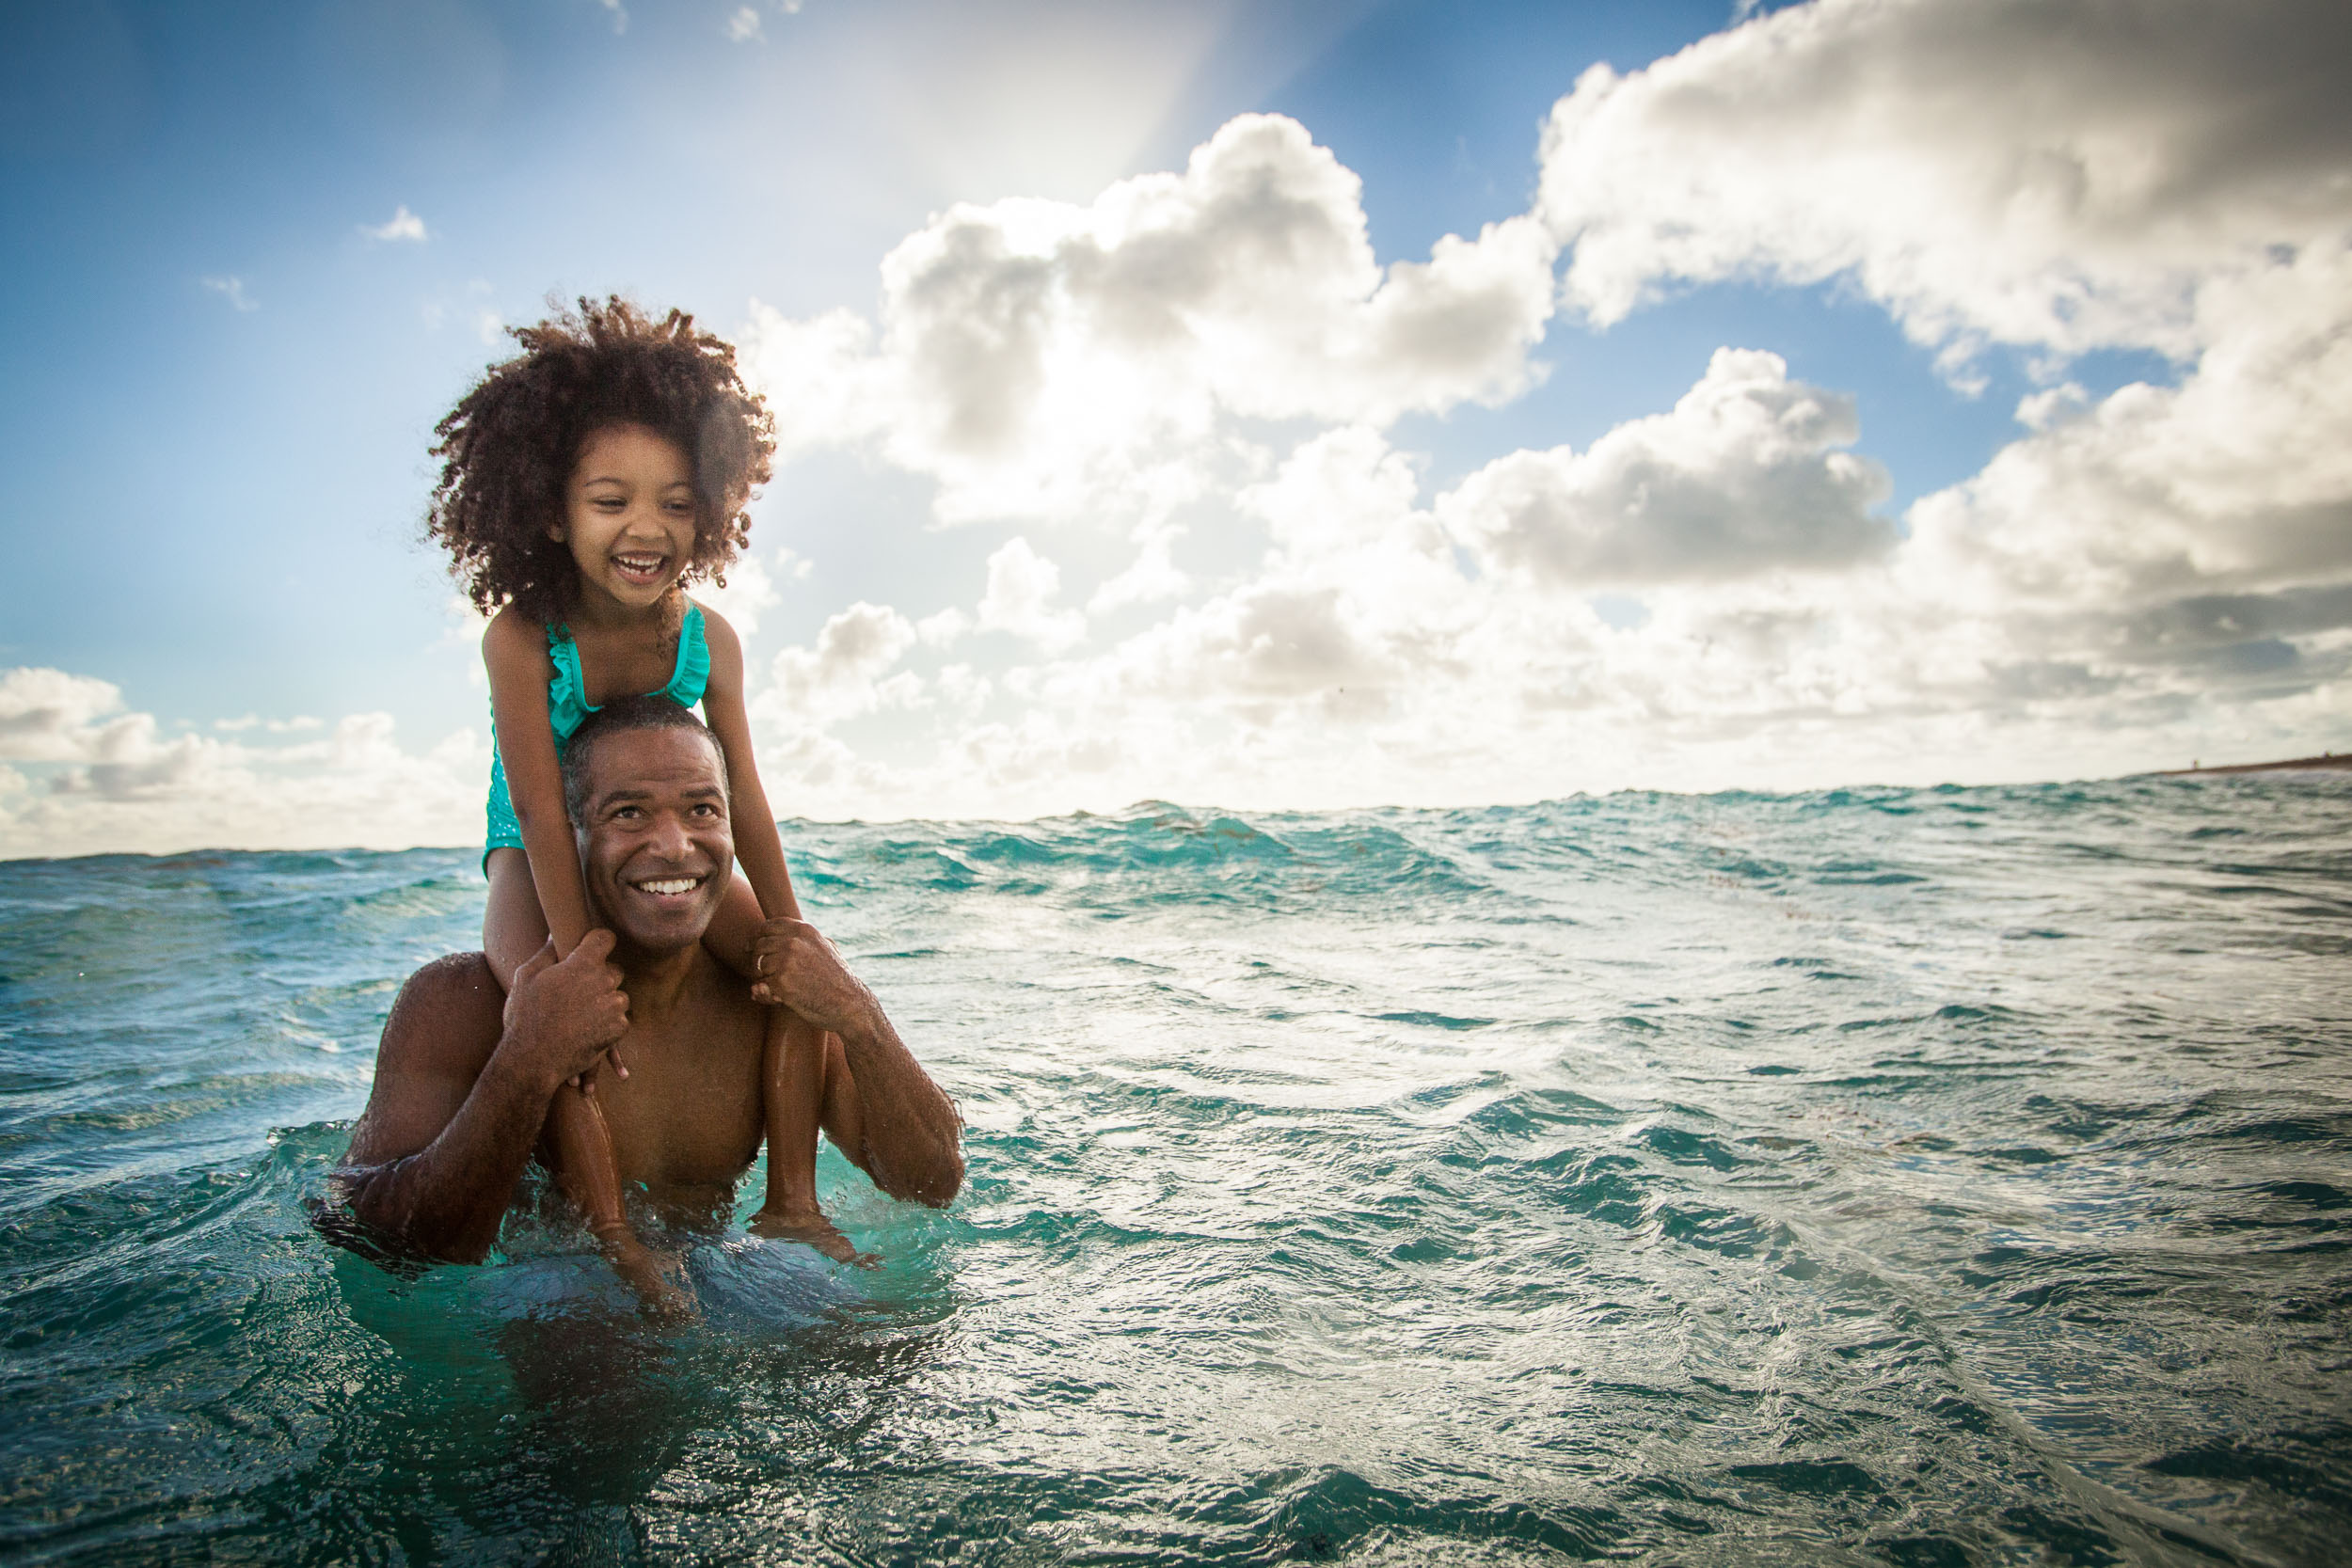 20121207_bgs_father_daughter_ocean_0002